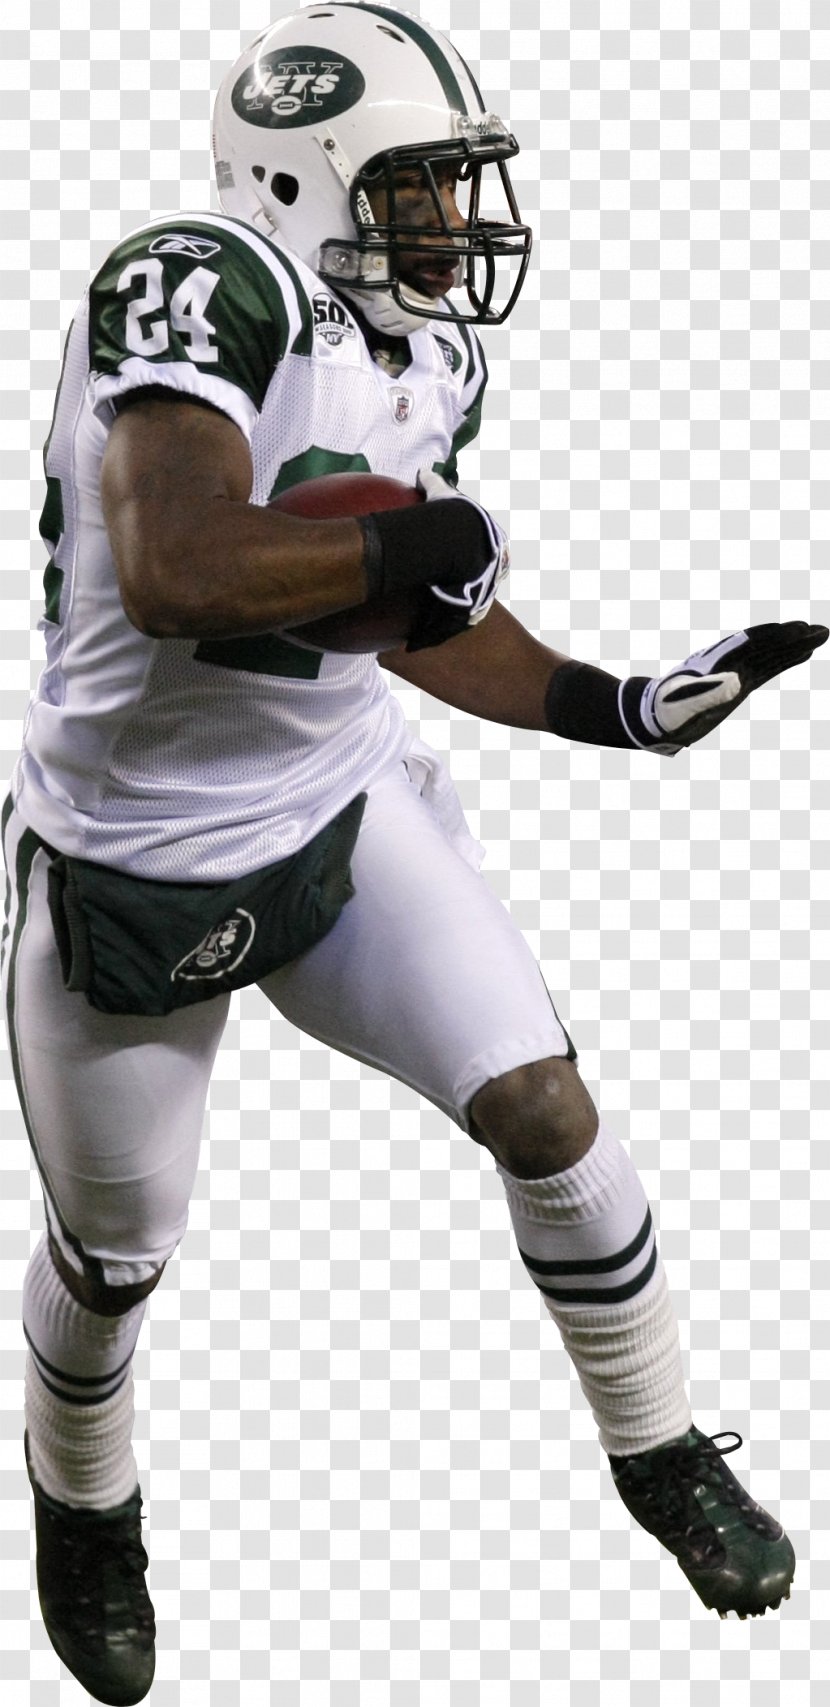 Face Mask American Football Helmets Logos And Uniforms Of The New York Jets Transparent PNG